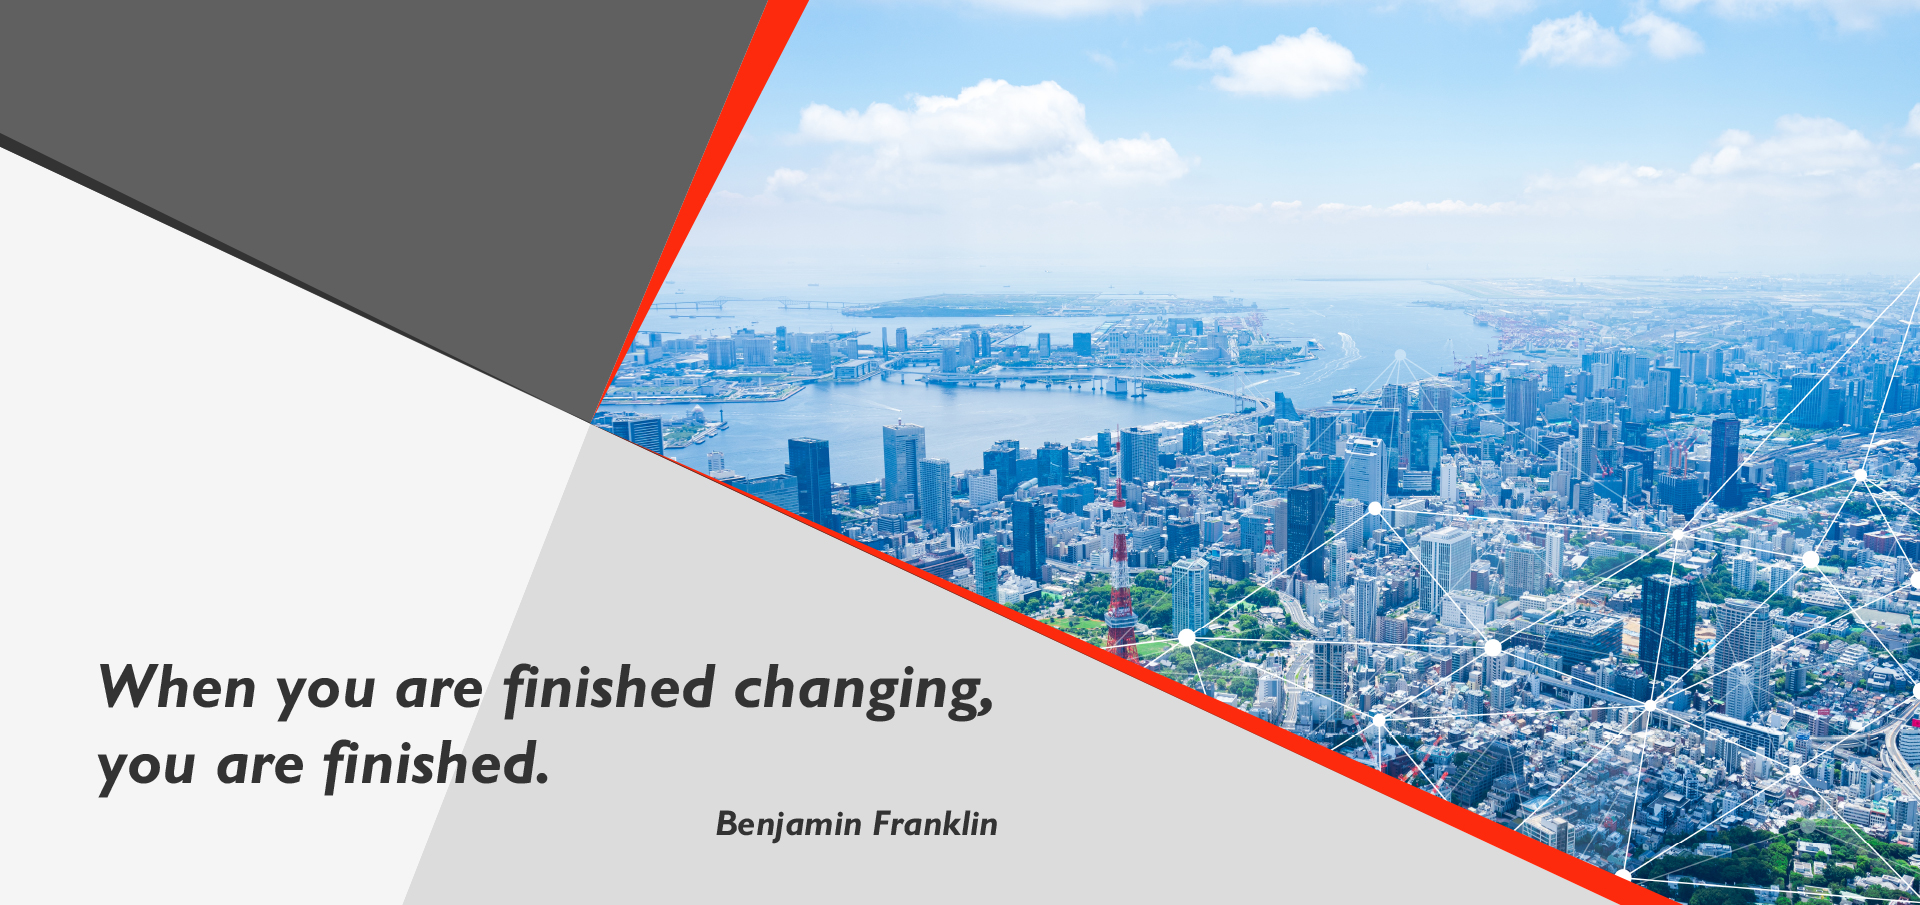 When you are finished changing, you are finished.Benjamin Franklin